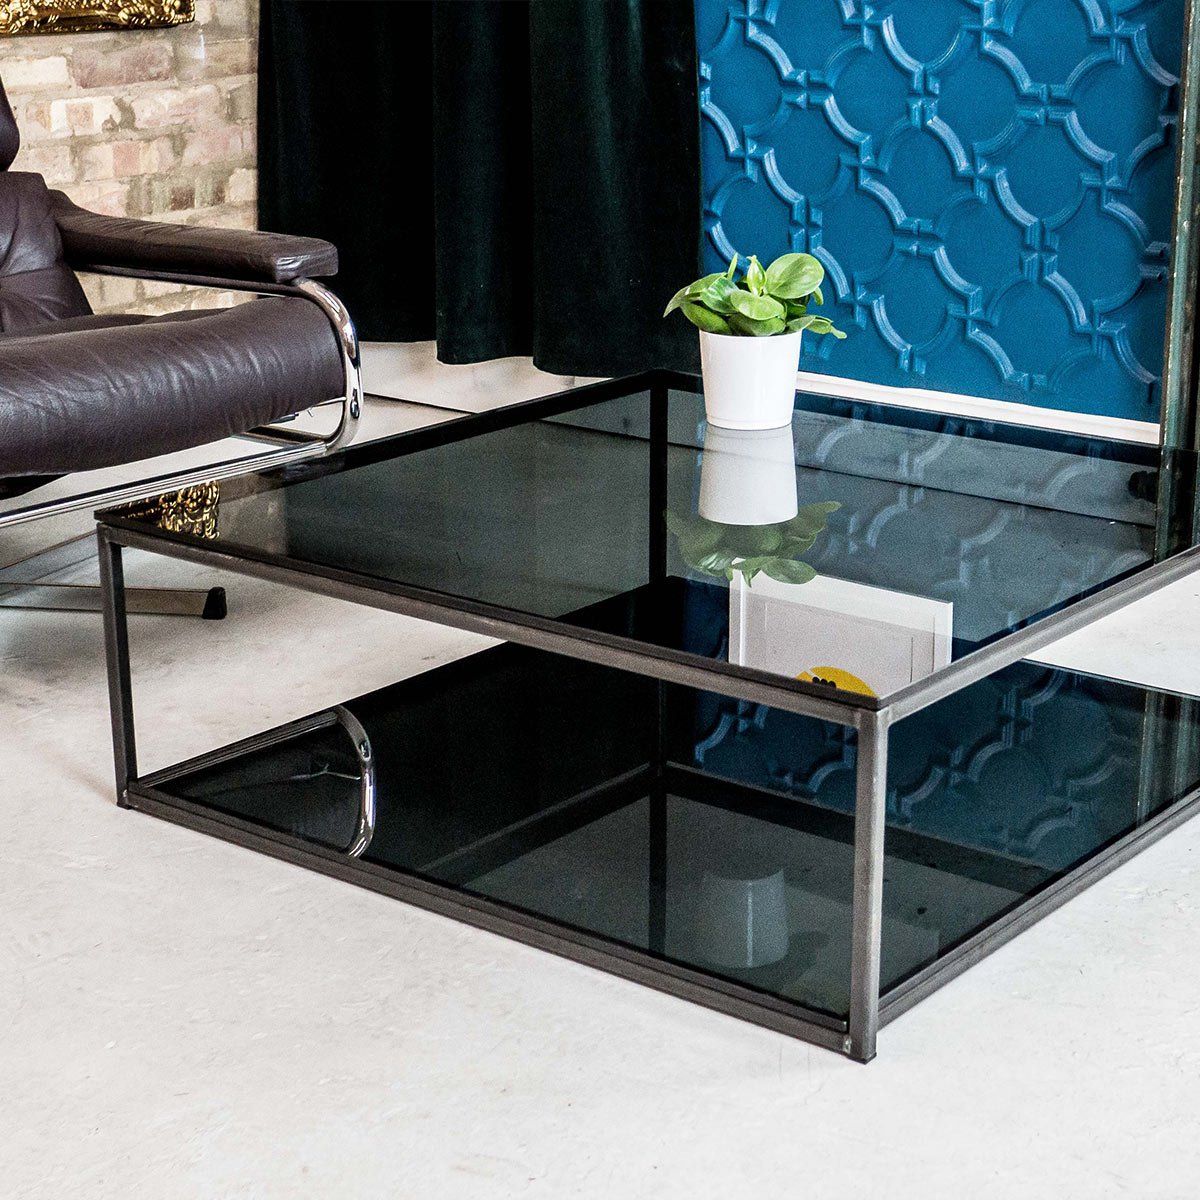 Glass Coffee Table With Shelves – 39 Modern Coffee Tables With Storage Regarding Glass Coffee Tables With Lower Shelves (View 13 of 20)